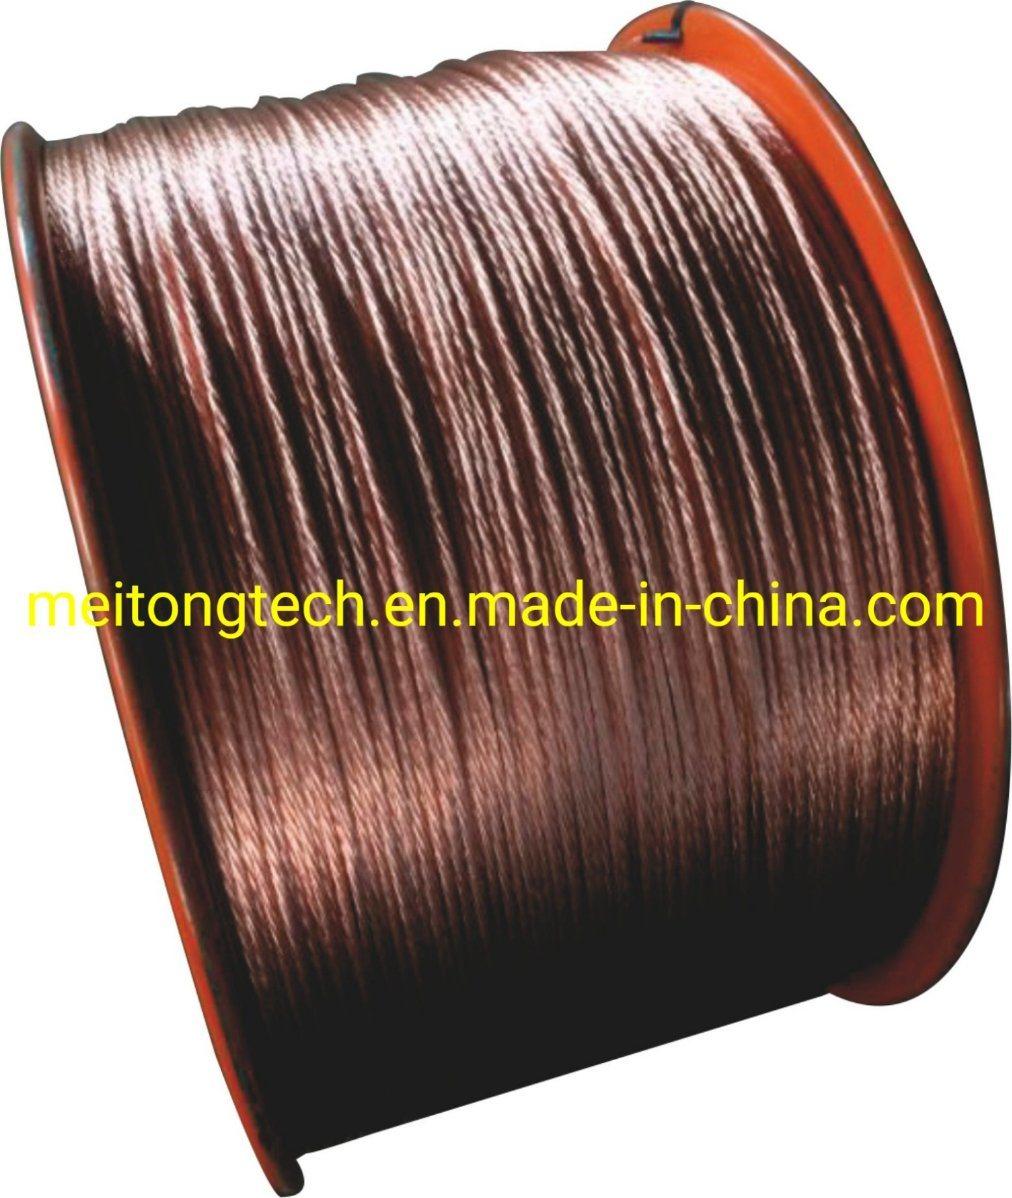 40% Conductivity Copper Clad Steel Wire for Coaxial Cable